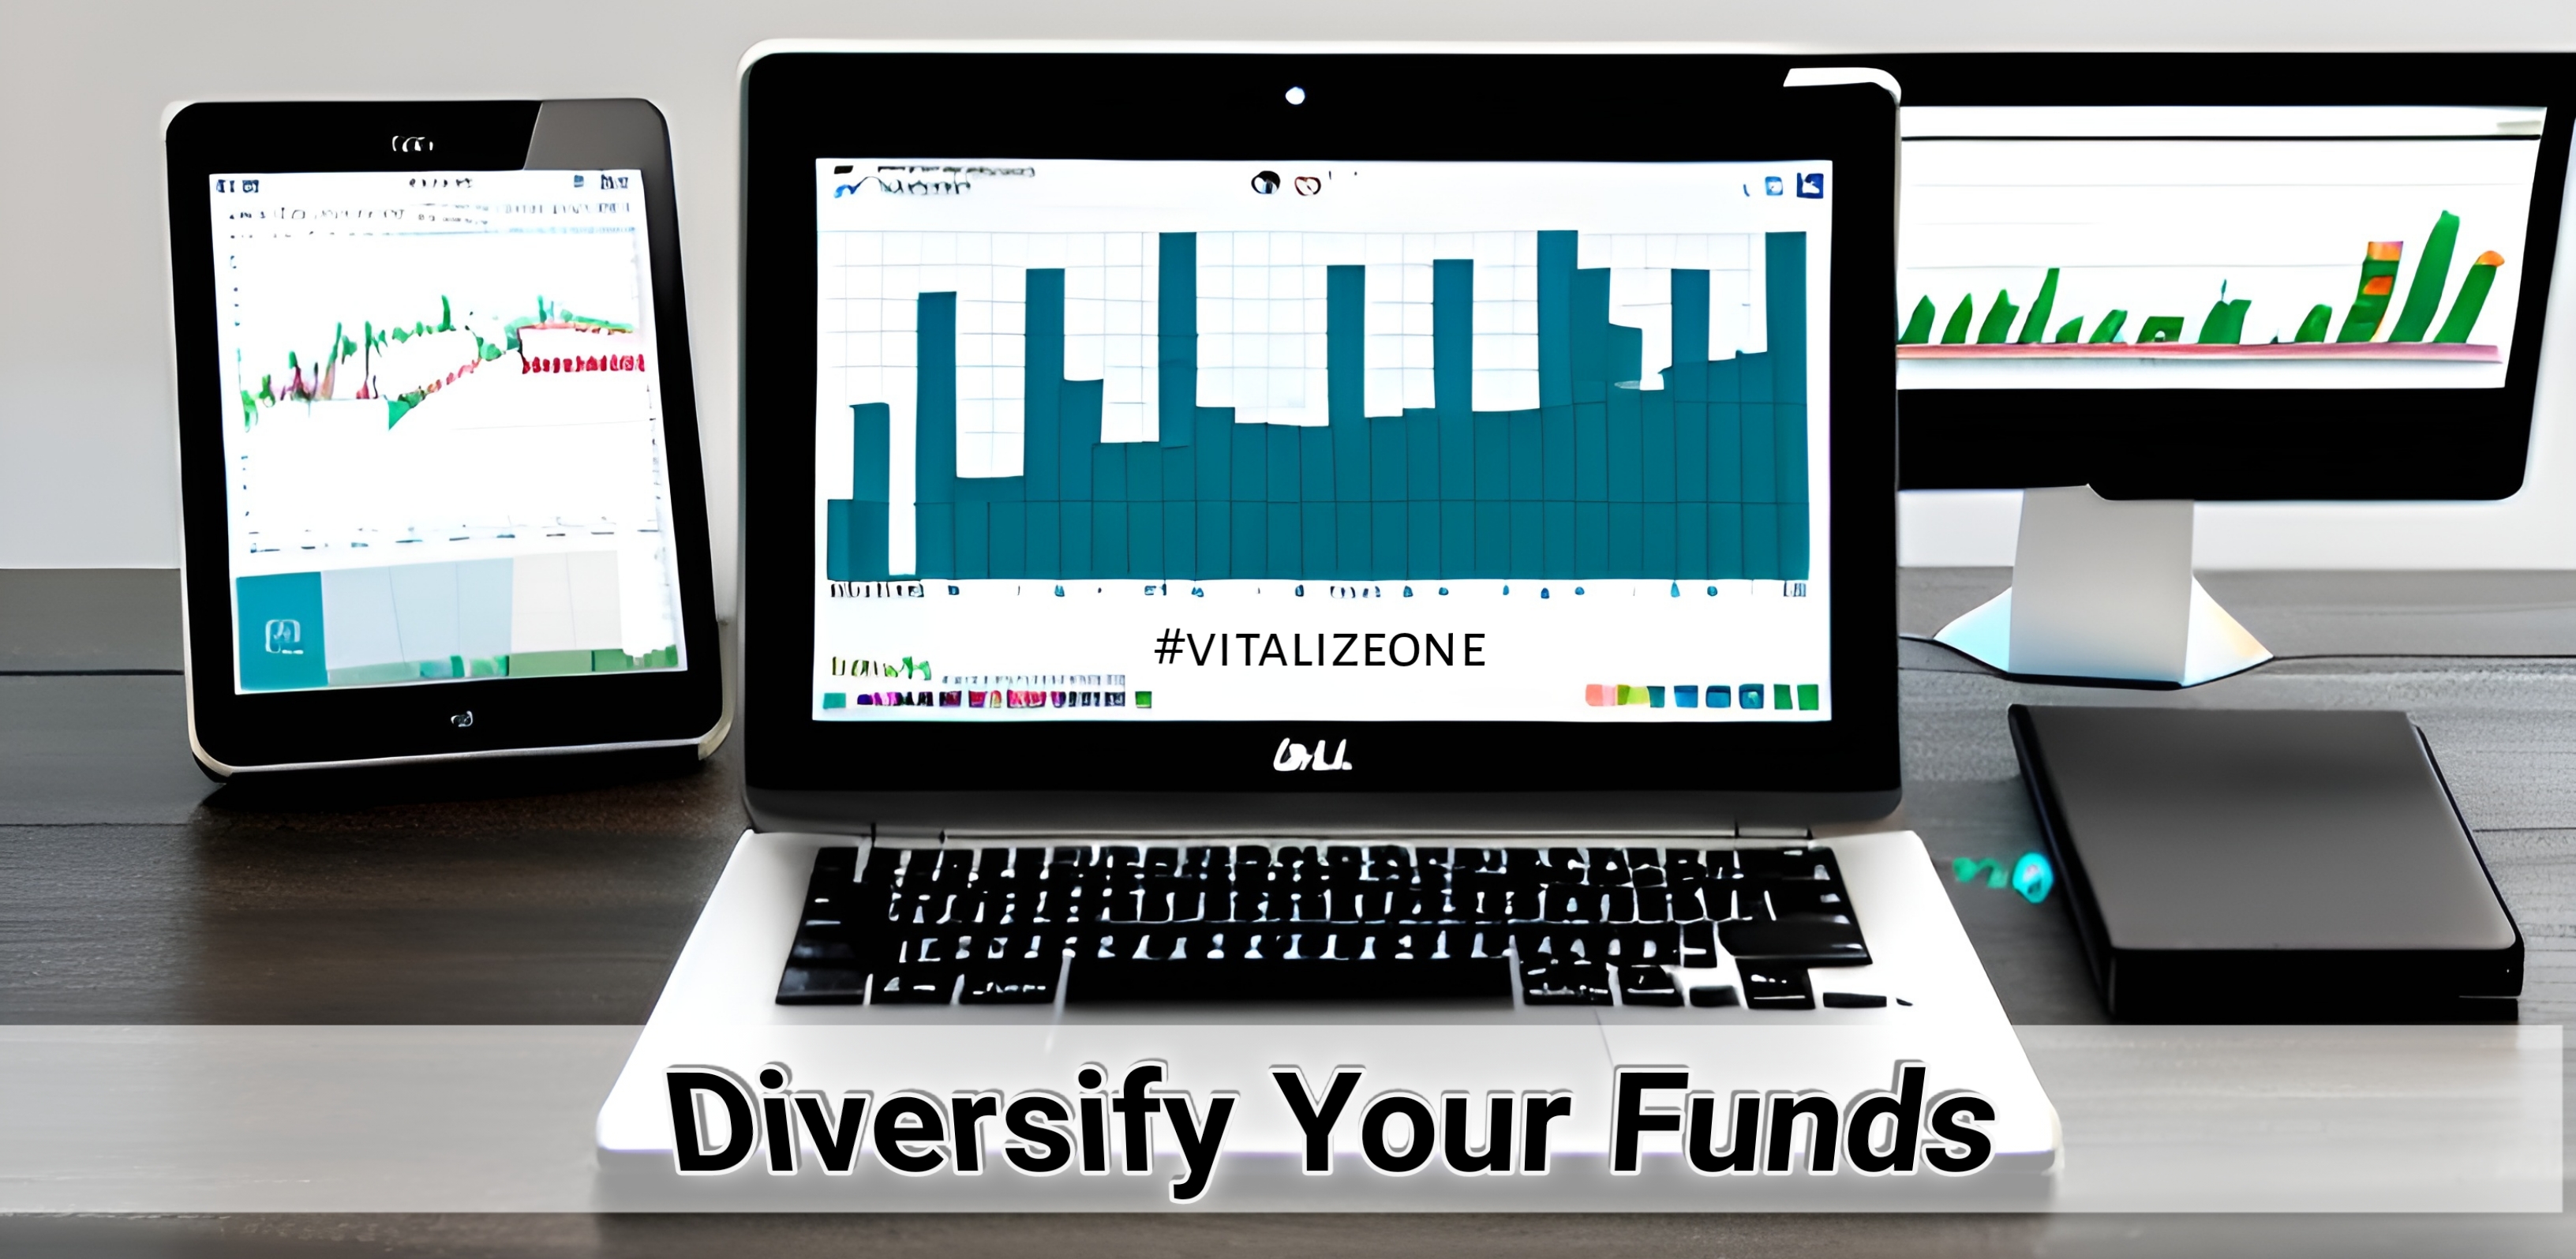 Diversify Your Funds: Exploring Different Investment Tools and Strategies | VitalyTennant.com | #vitalizeone 2